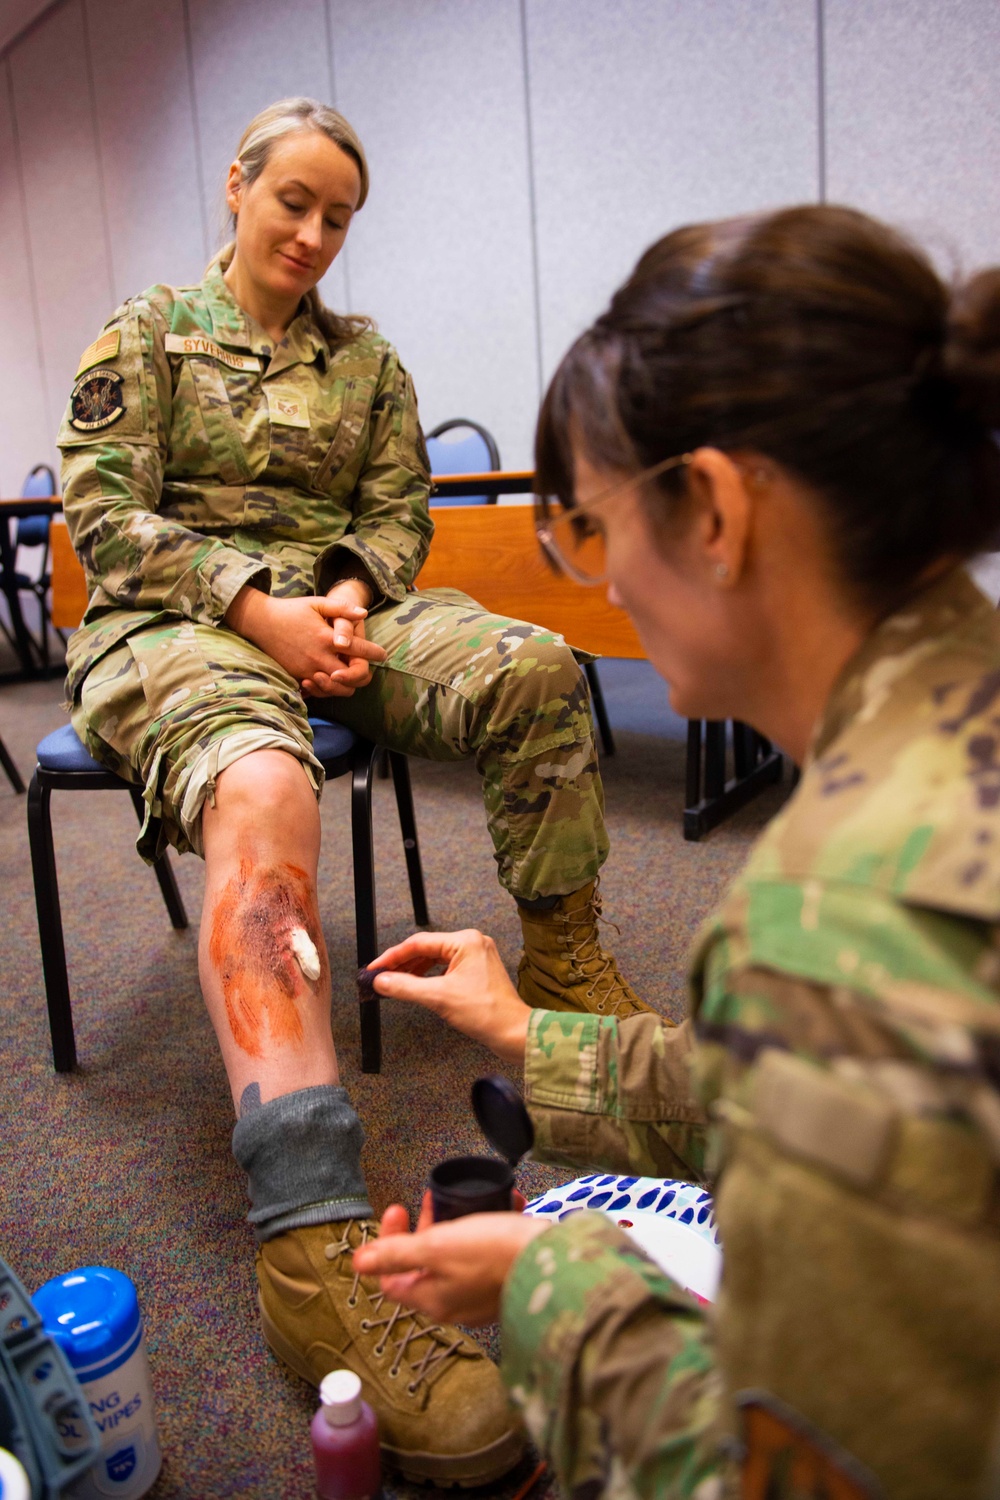 First Blood: moulage brings life to training